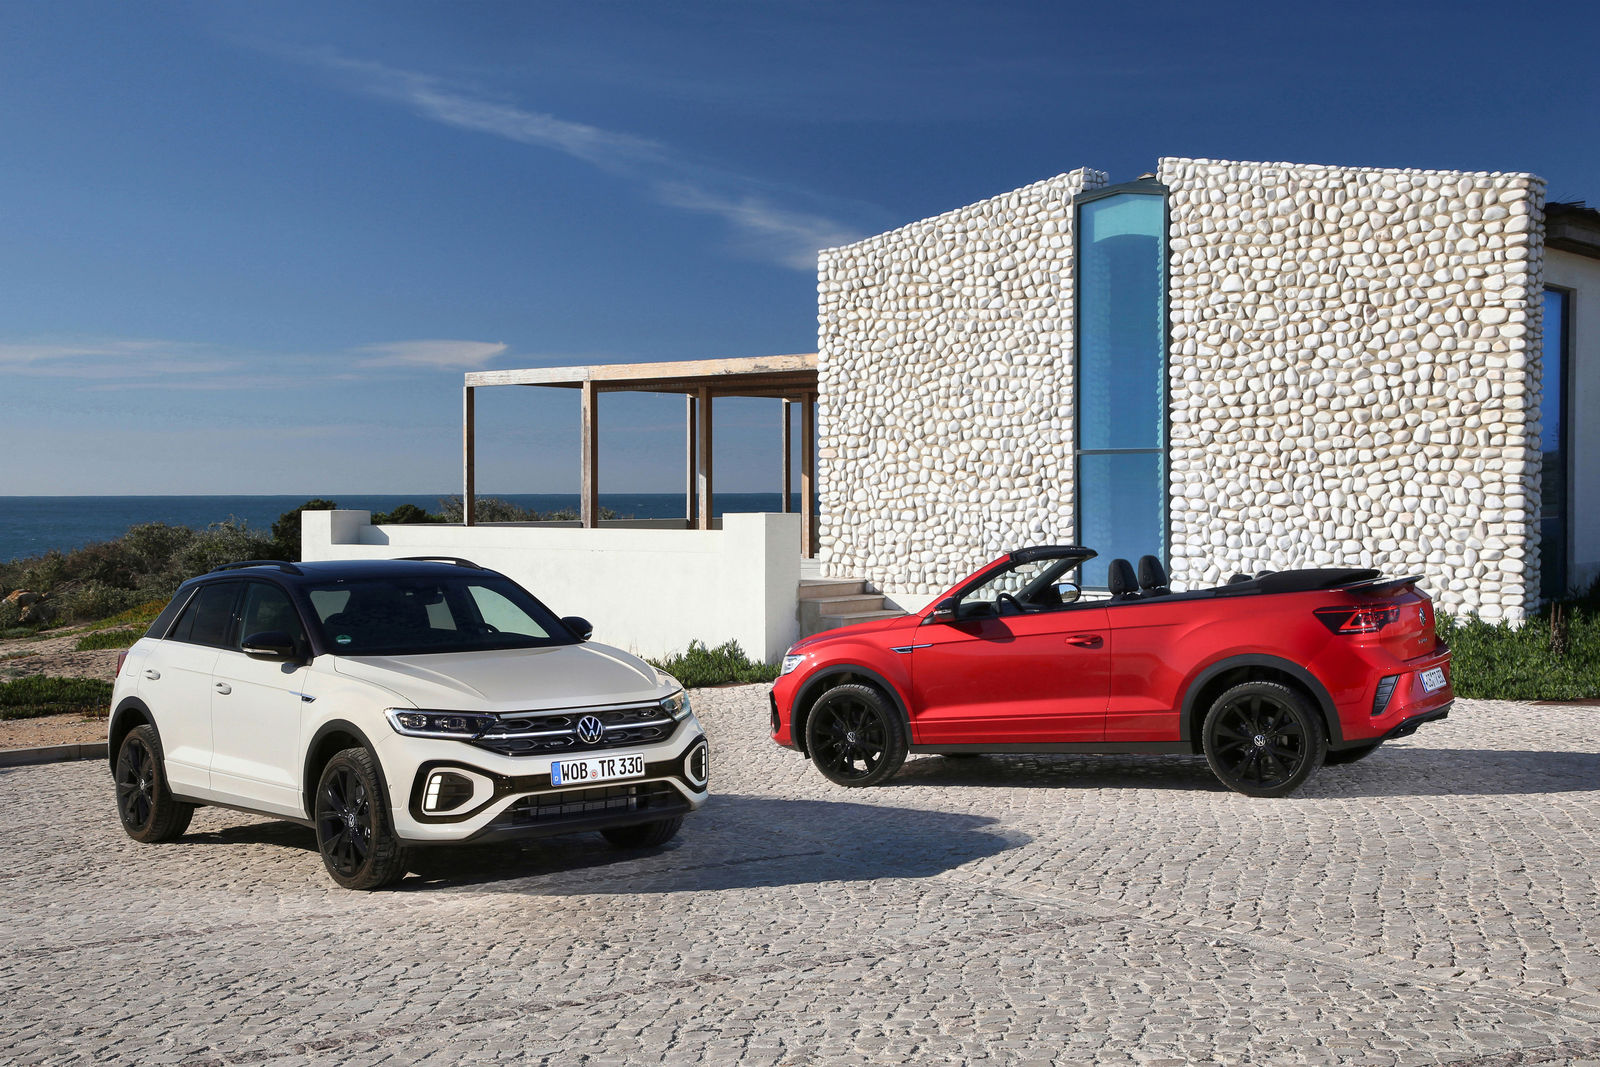 The new “Roc stars” among compact SUVs: T-Roc and T-Roc Cabriolet on sale  now